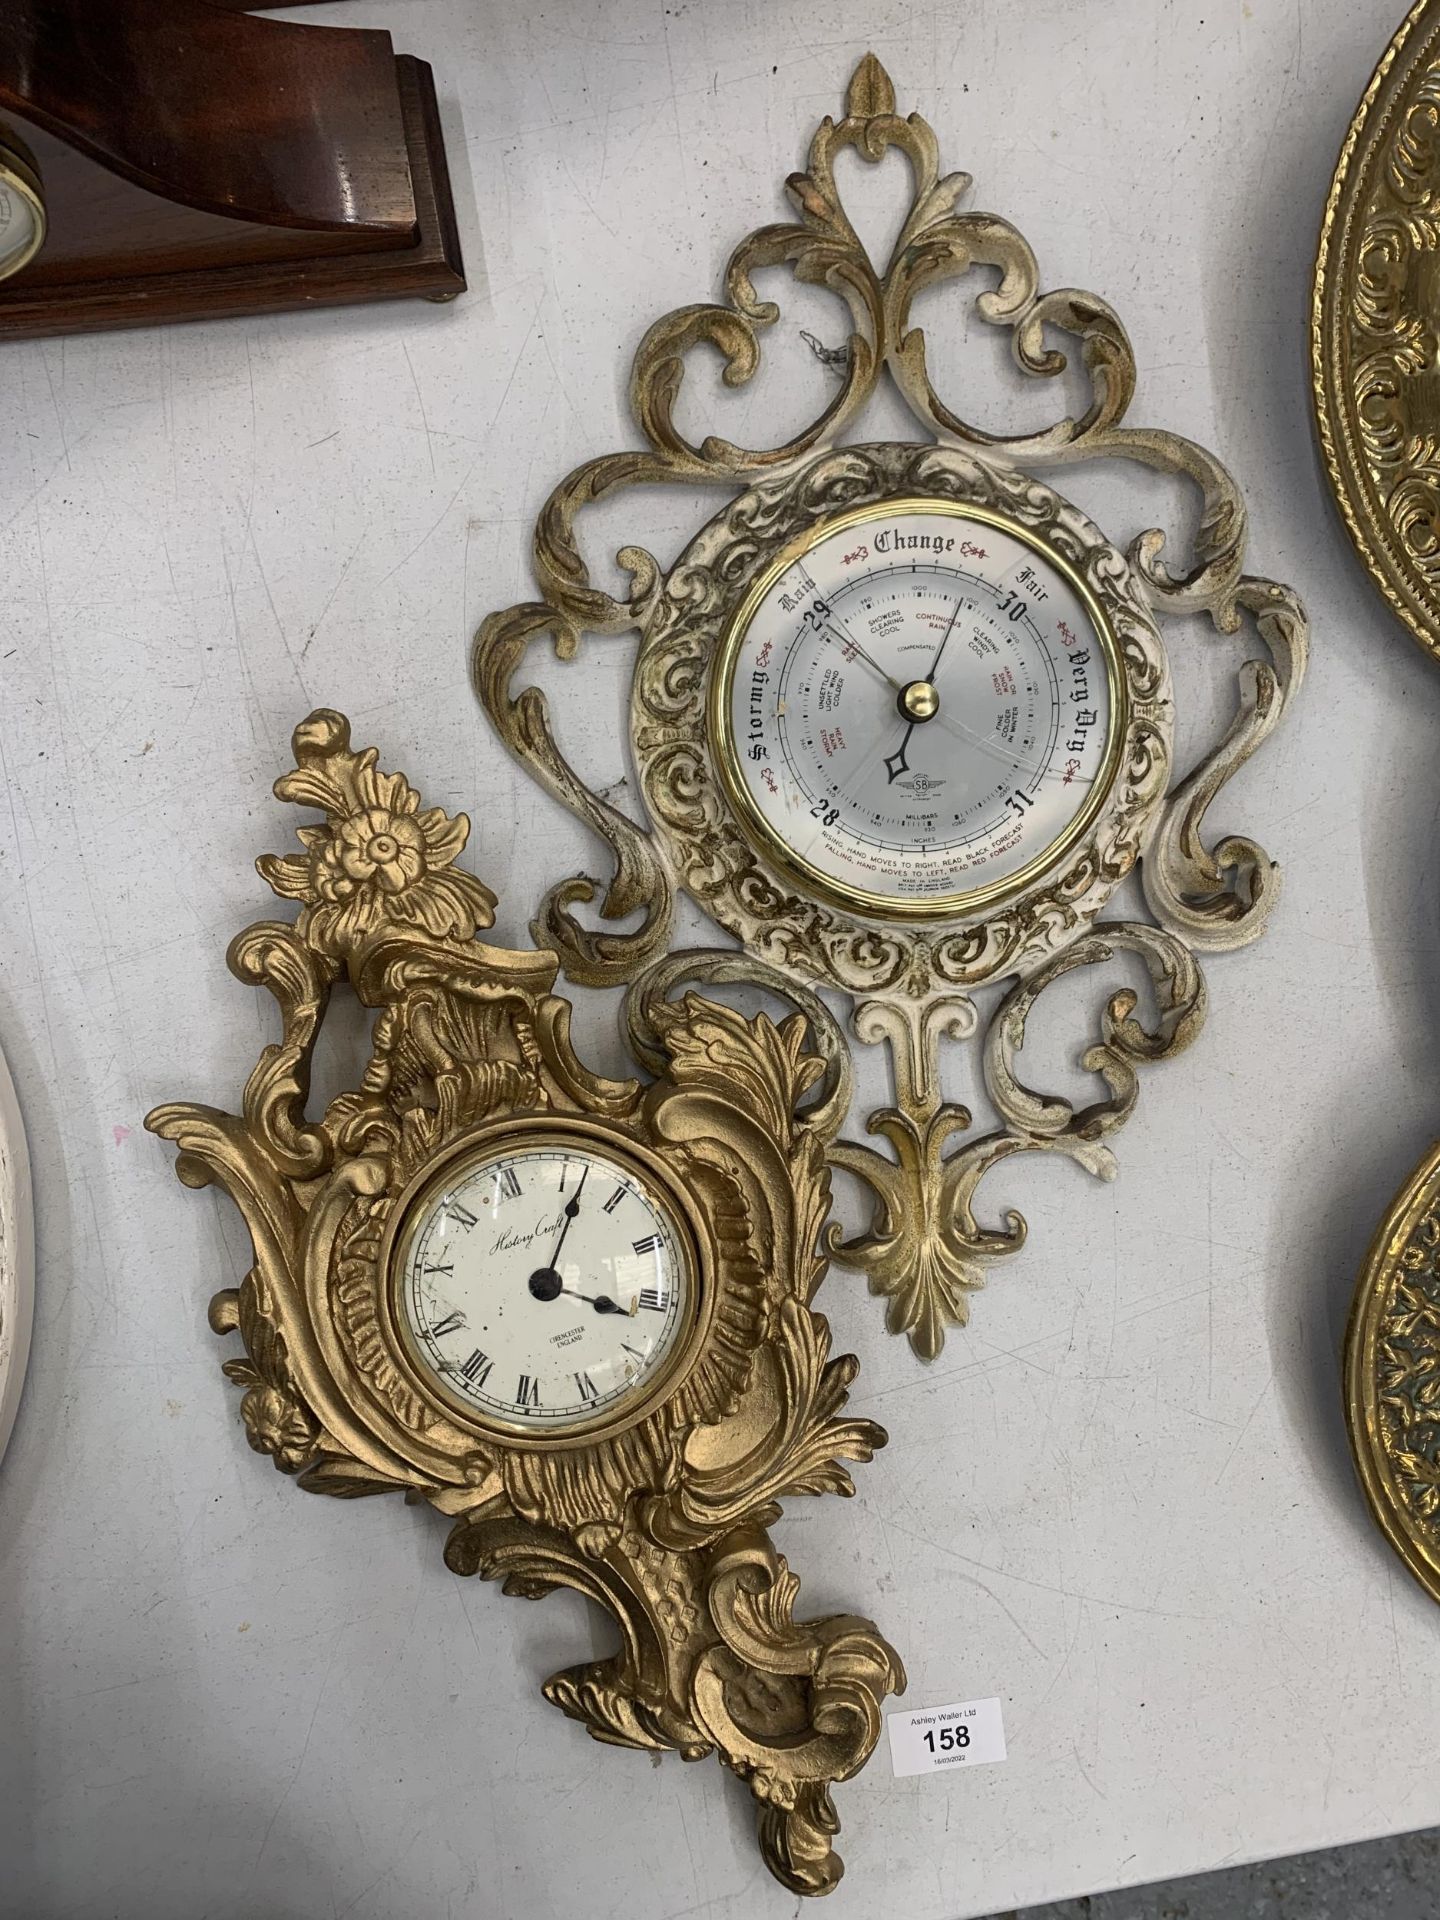 AN ORNATE STYLE RESIN BAROMETER AND A WALL CLOCK